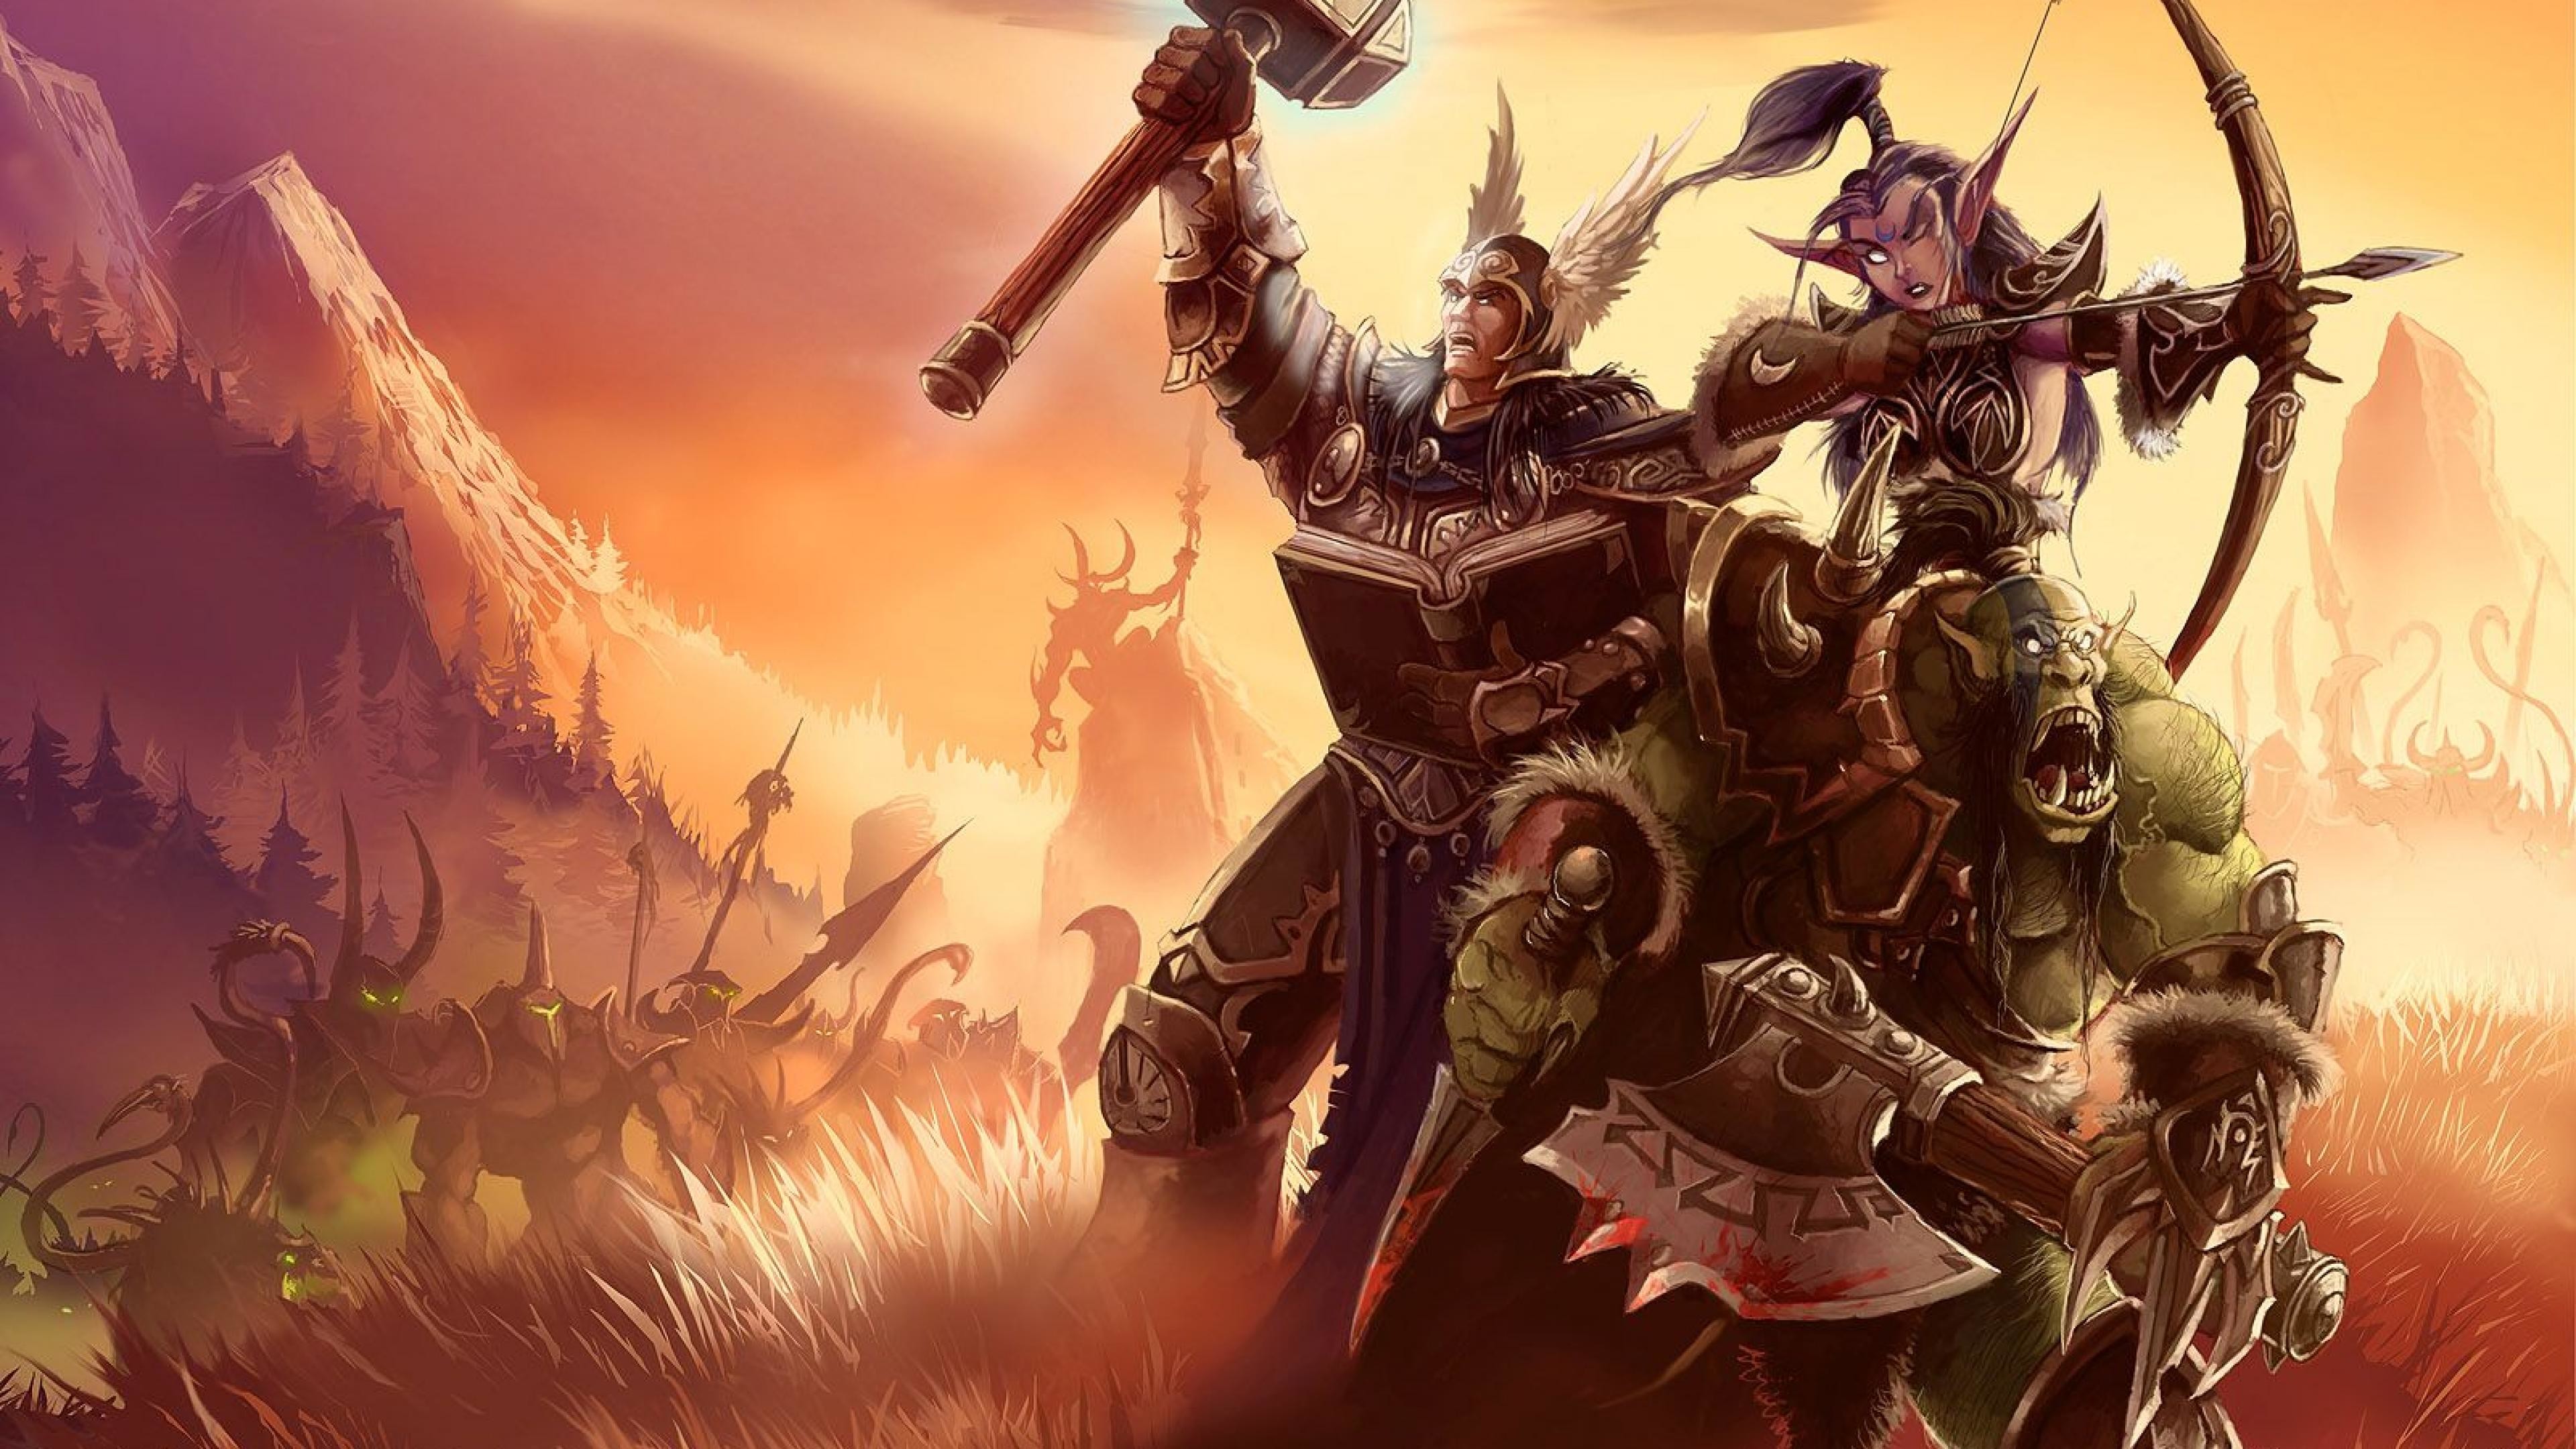 3840x2160 world of warcraft wow orcs elfs humans video games Mobile resolutions:  640x960 640x1136 750x1334